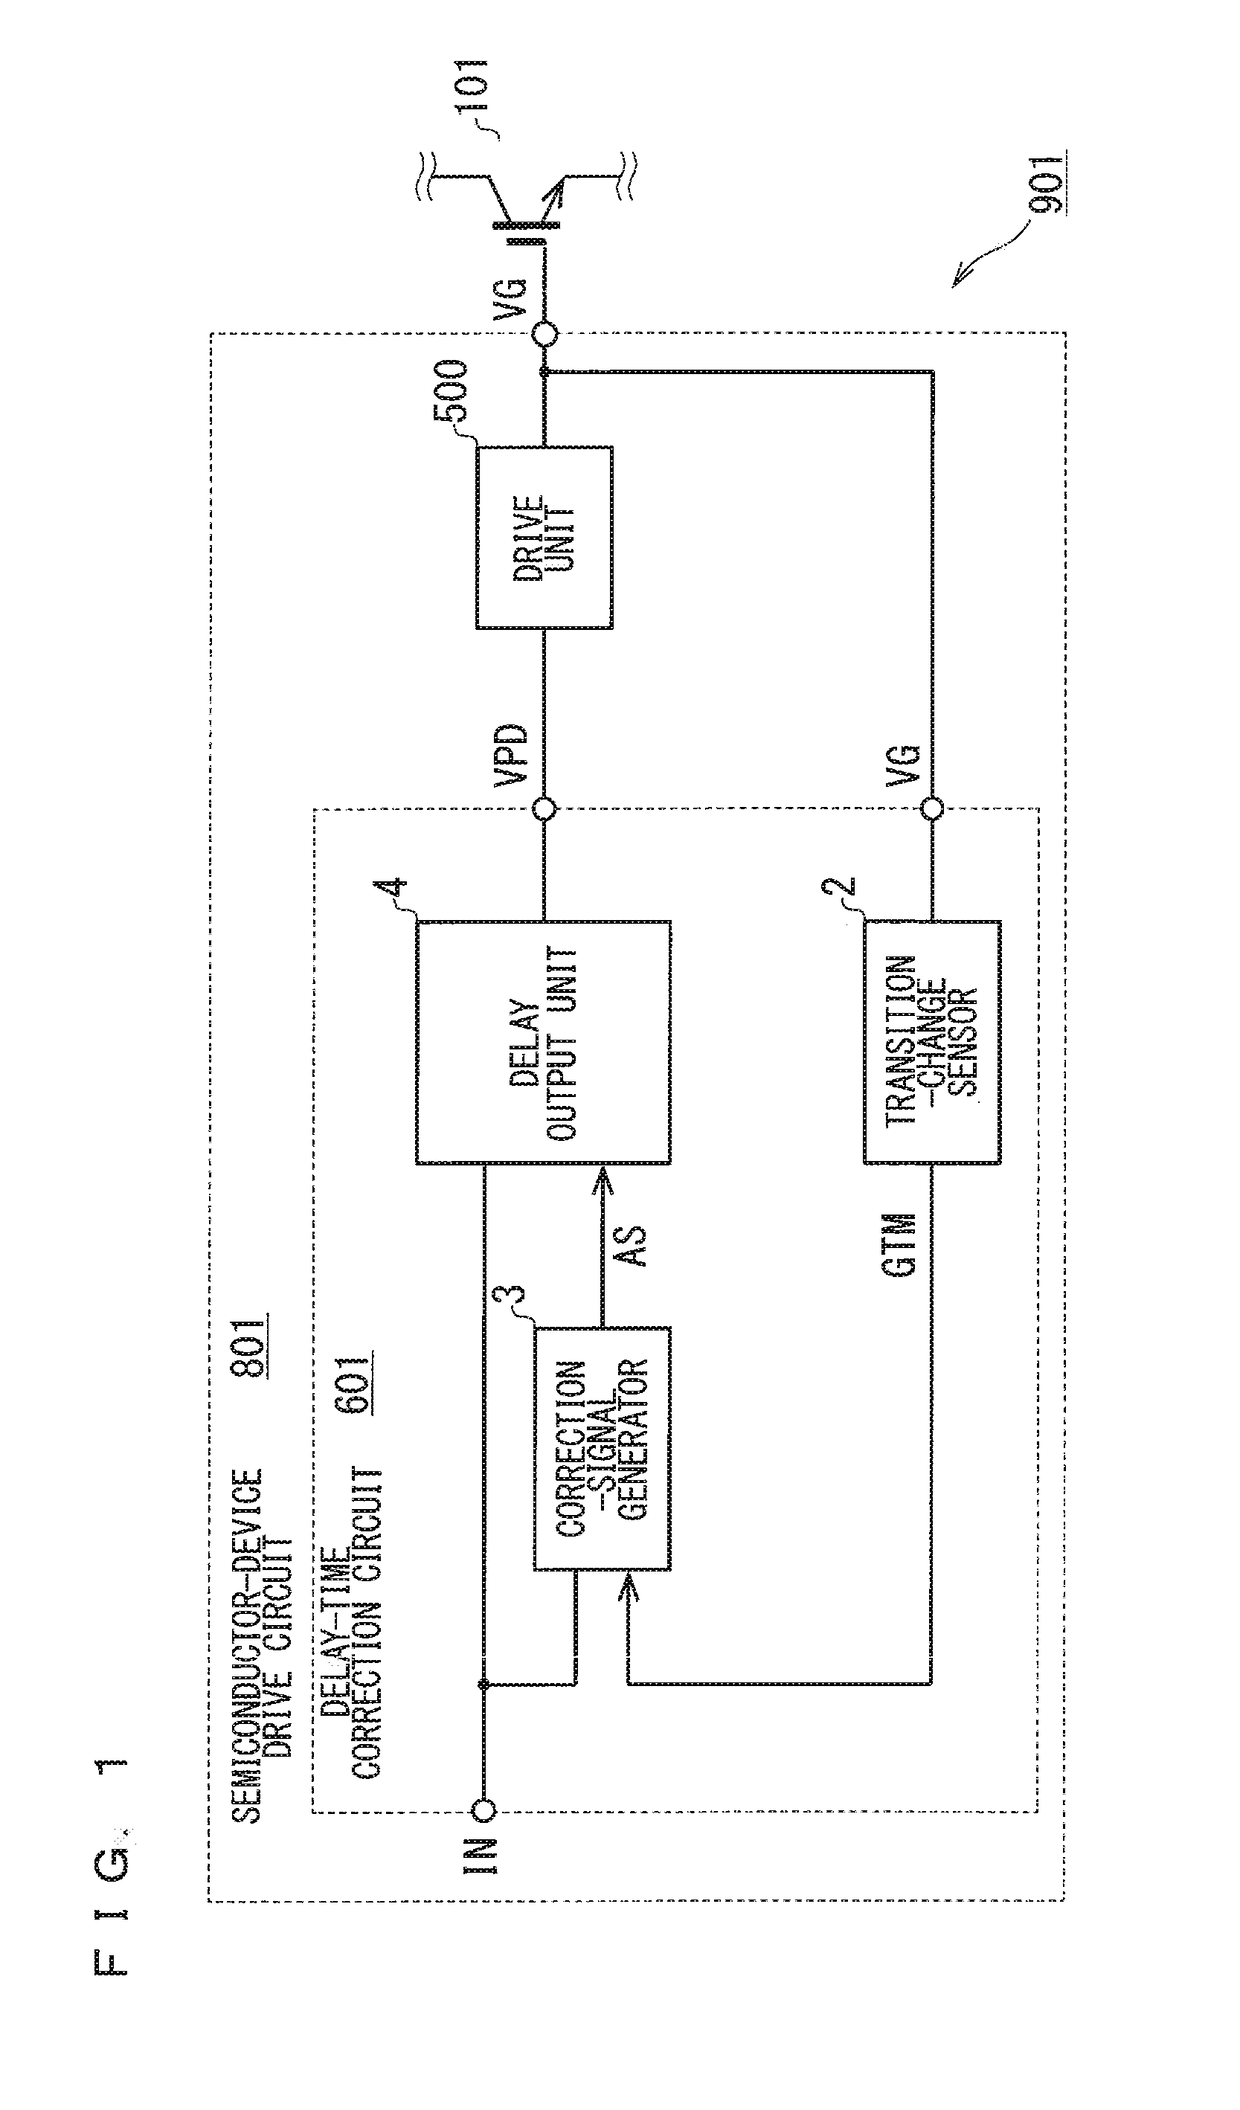 Delay-time correction circuit, semiconductor-device drive circuit, and semiconductor device